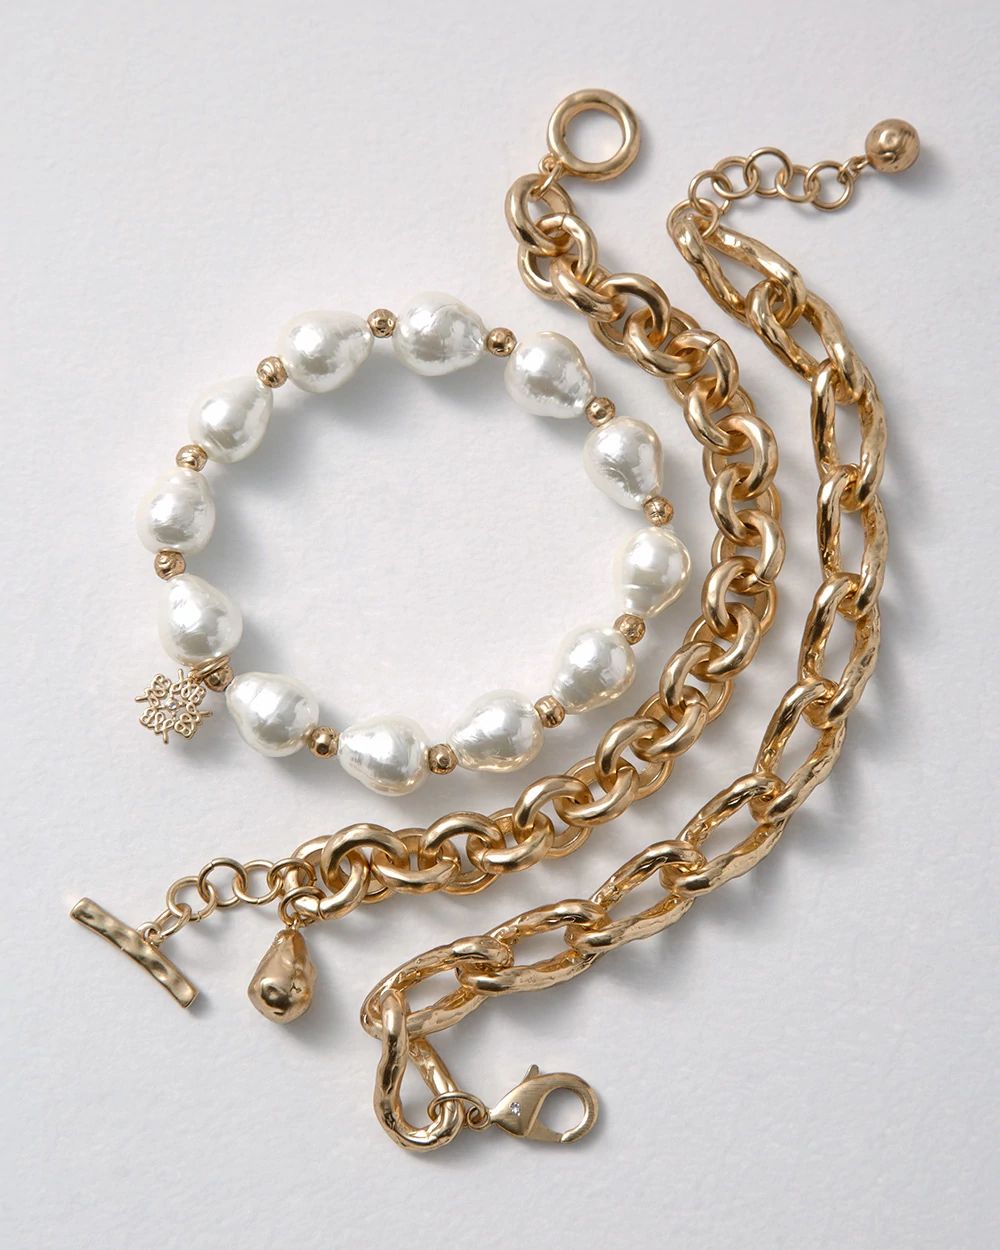 Three-Pack Goldtone & Pearl Bracelet click to view larger image.